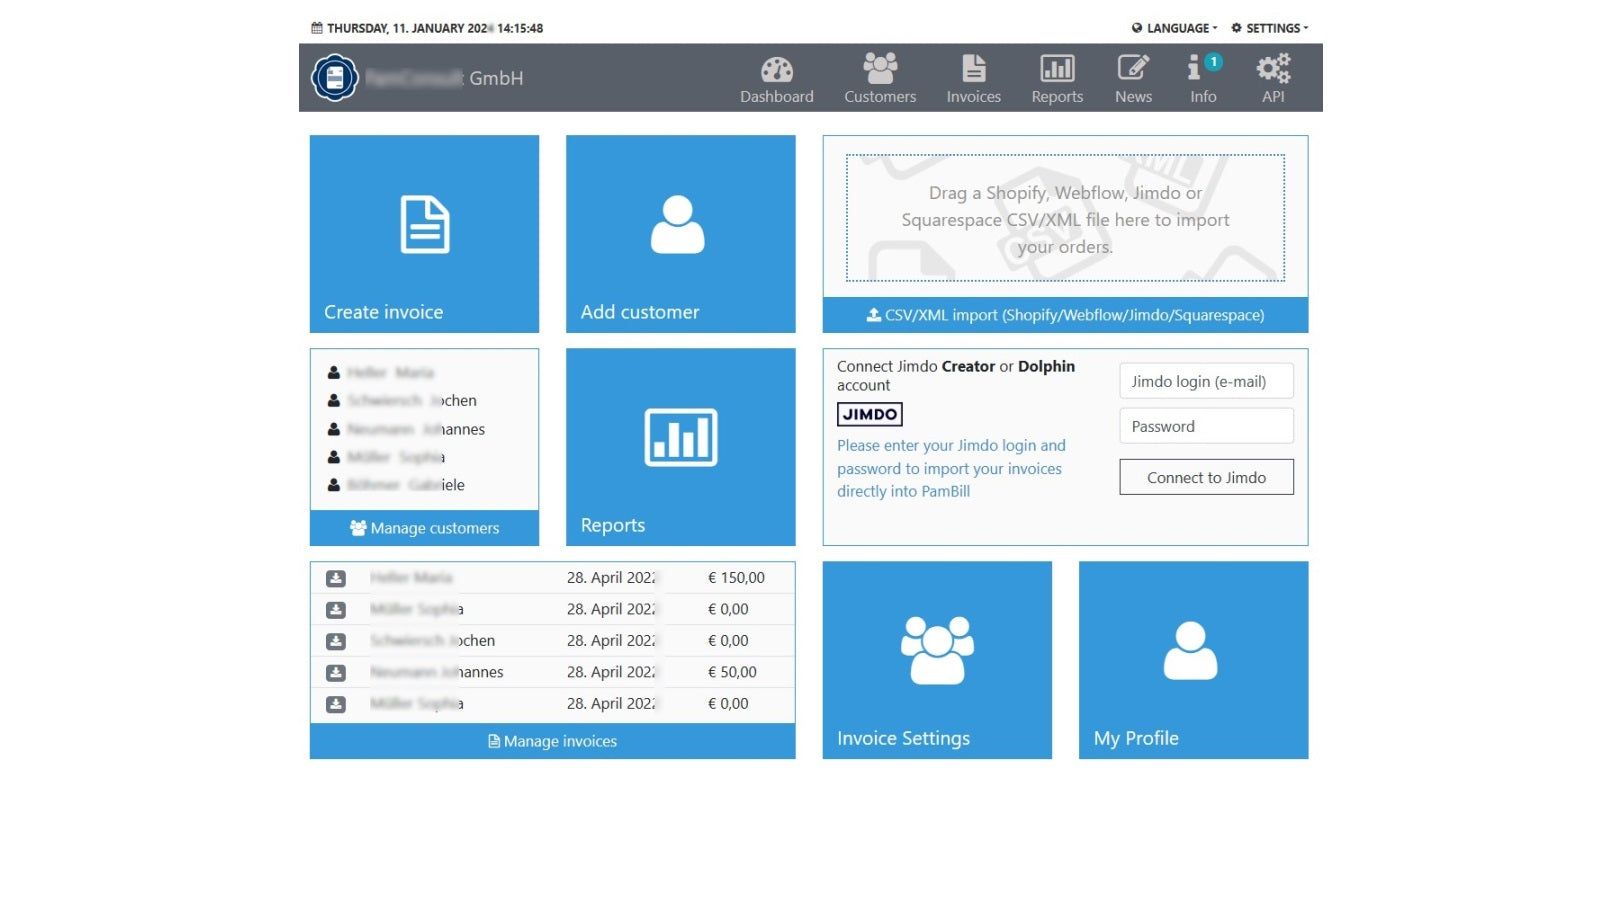 PamBill Dashboard to manage invoices, customers and more